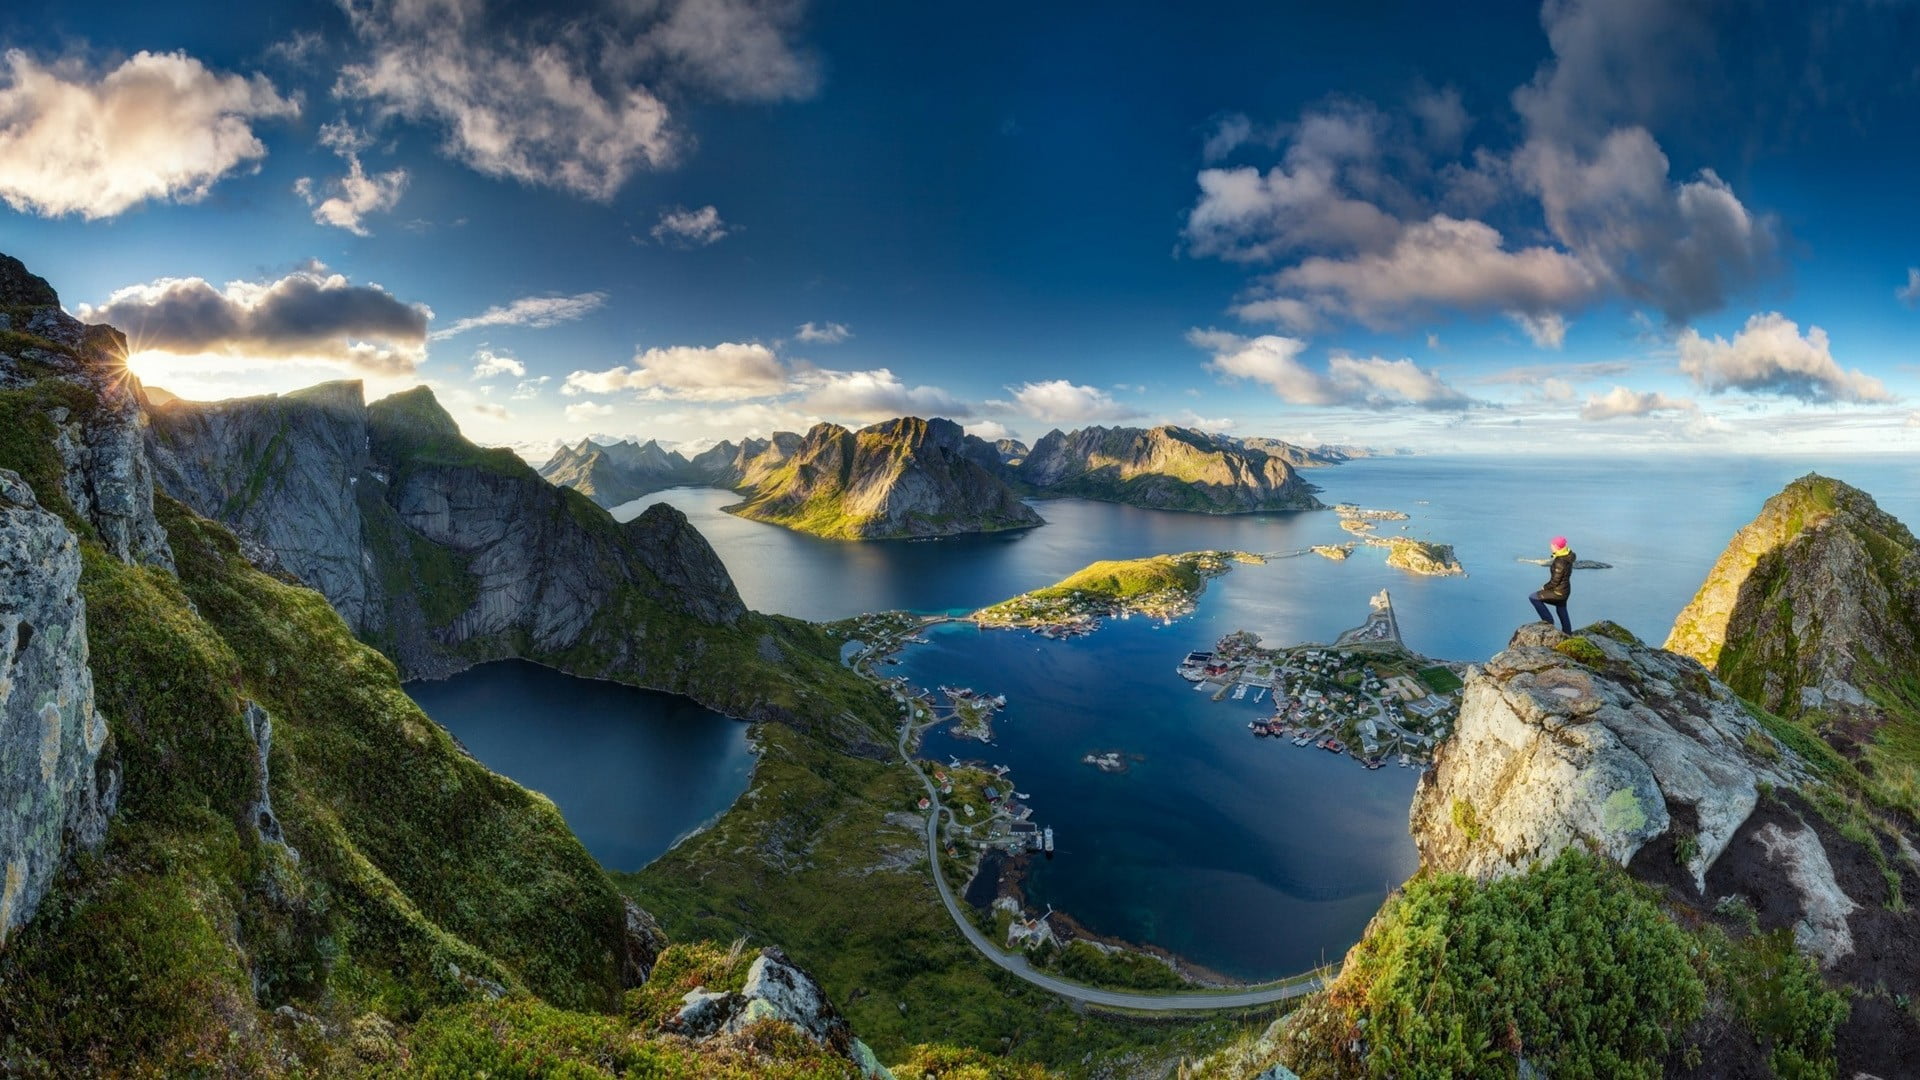 scenery of landscape, person standing on cliff, Lofoten, Norway